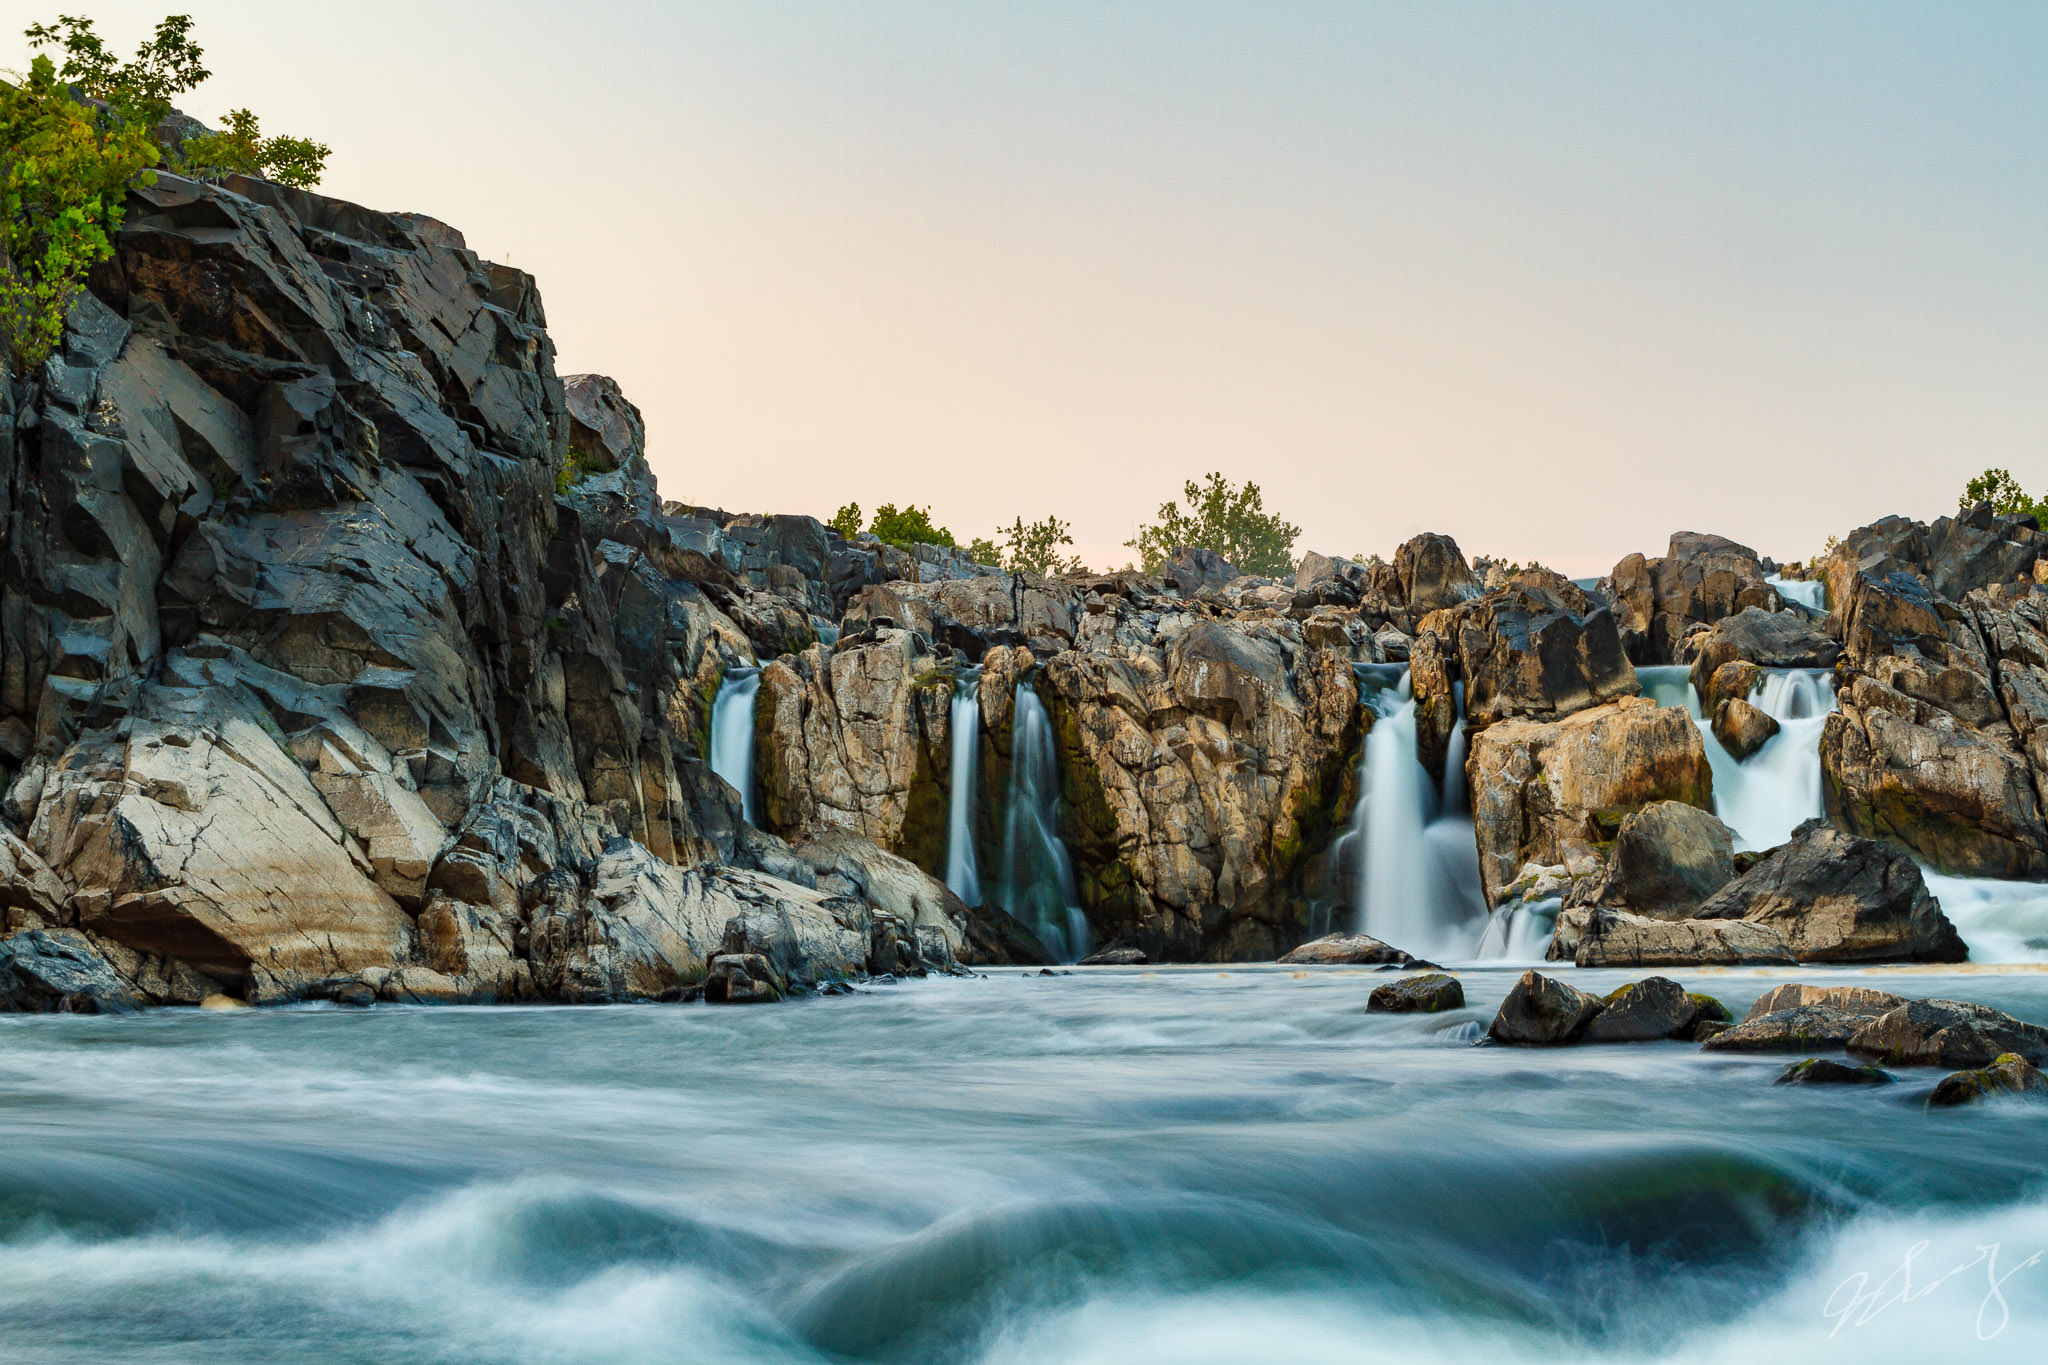 Why Visit Great Falls this Vacation